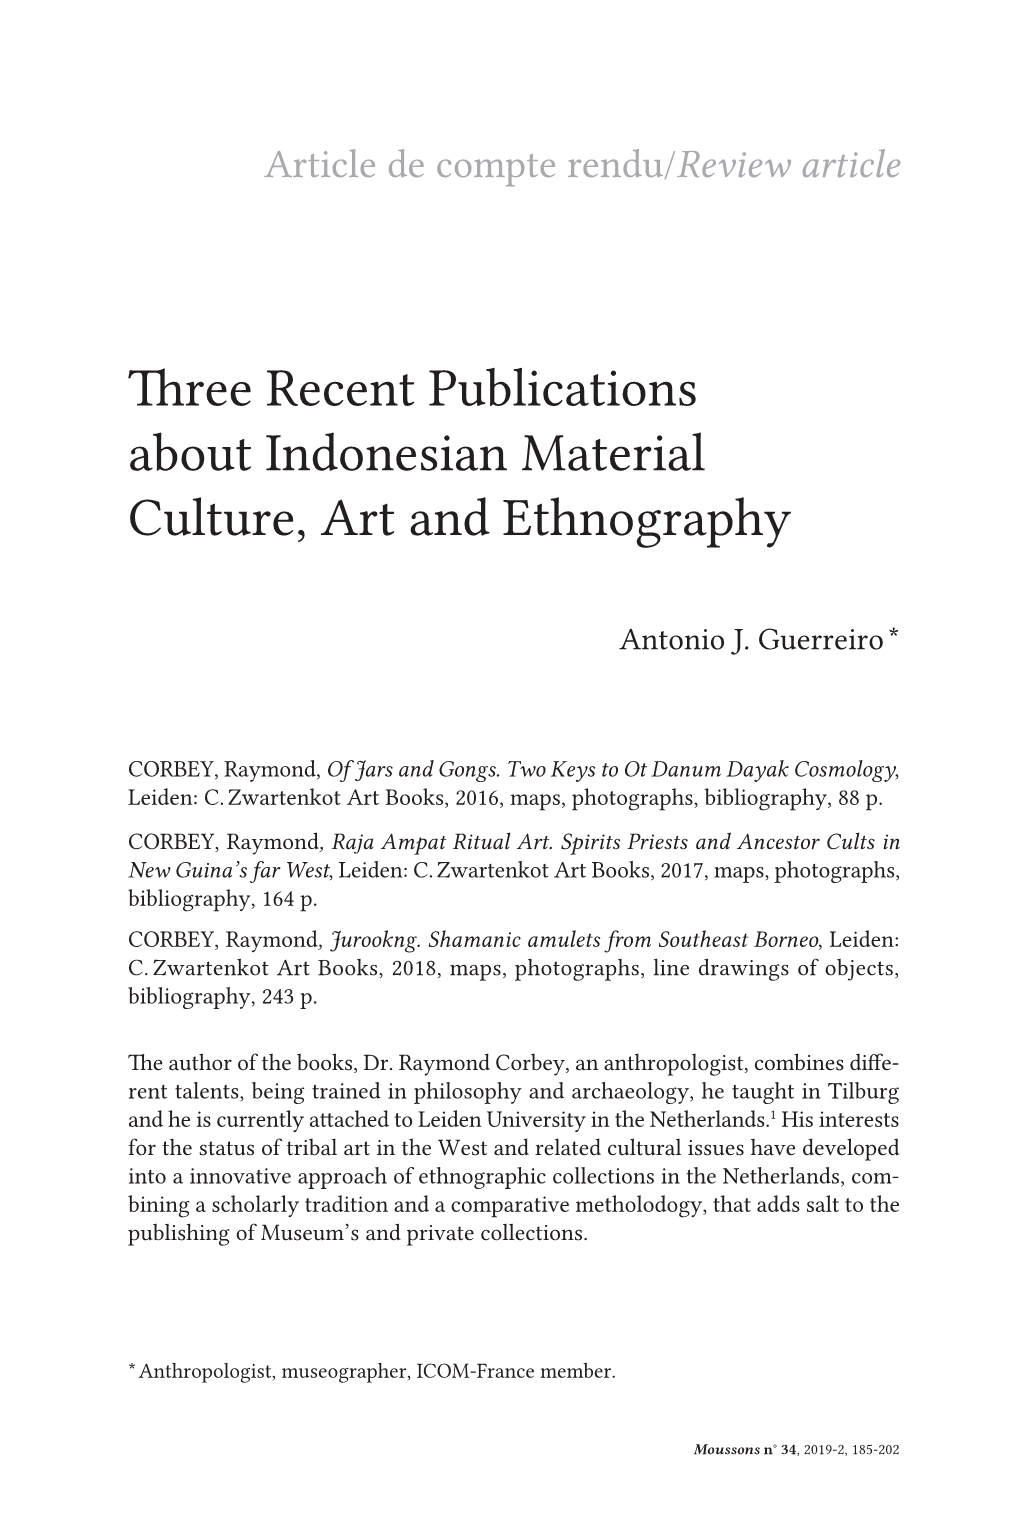 Three Recent Publications About Indonesian Material Culture, Art and Ethnography